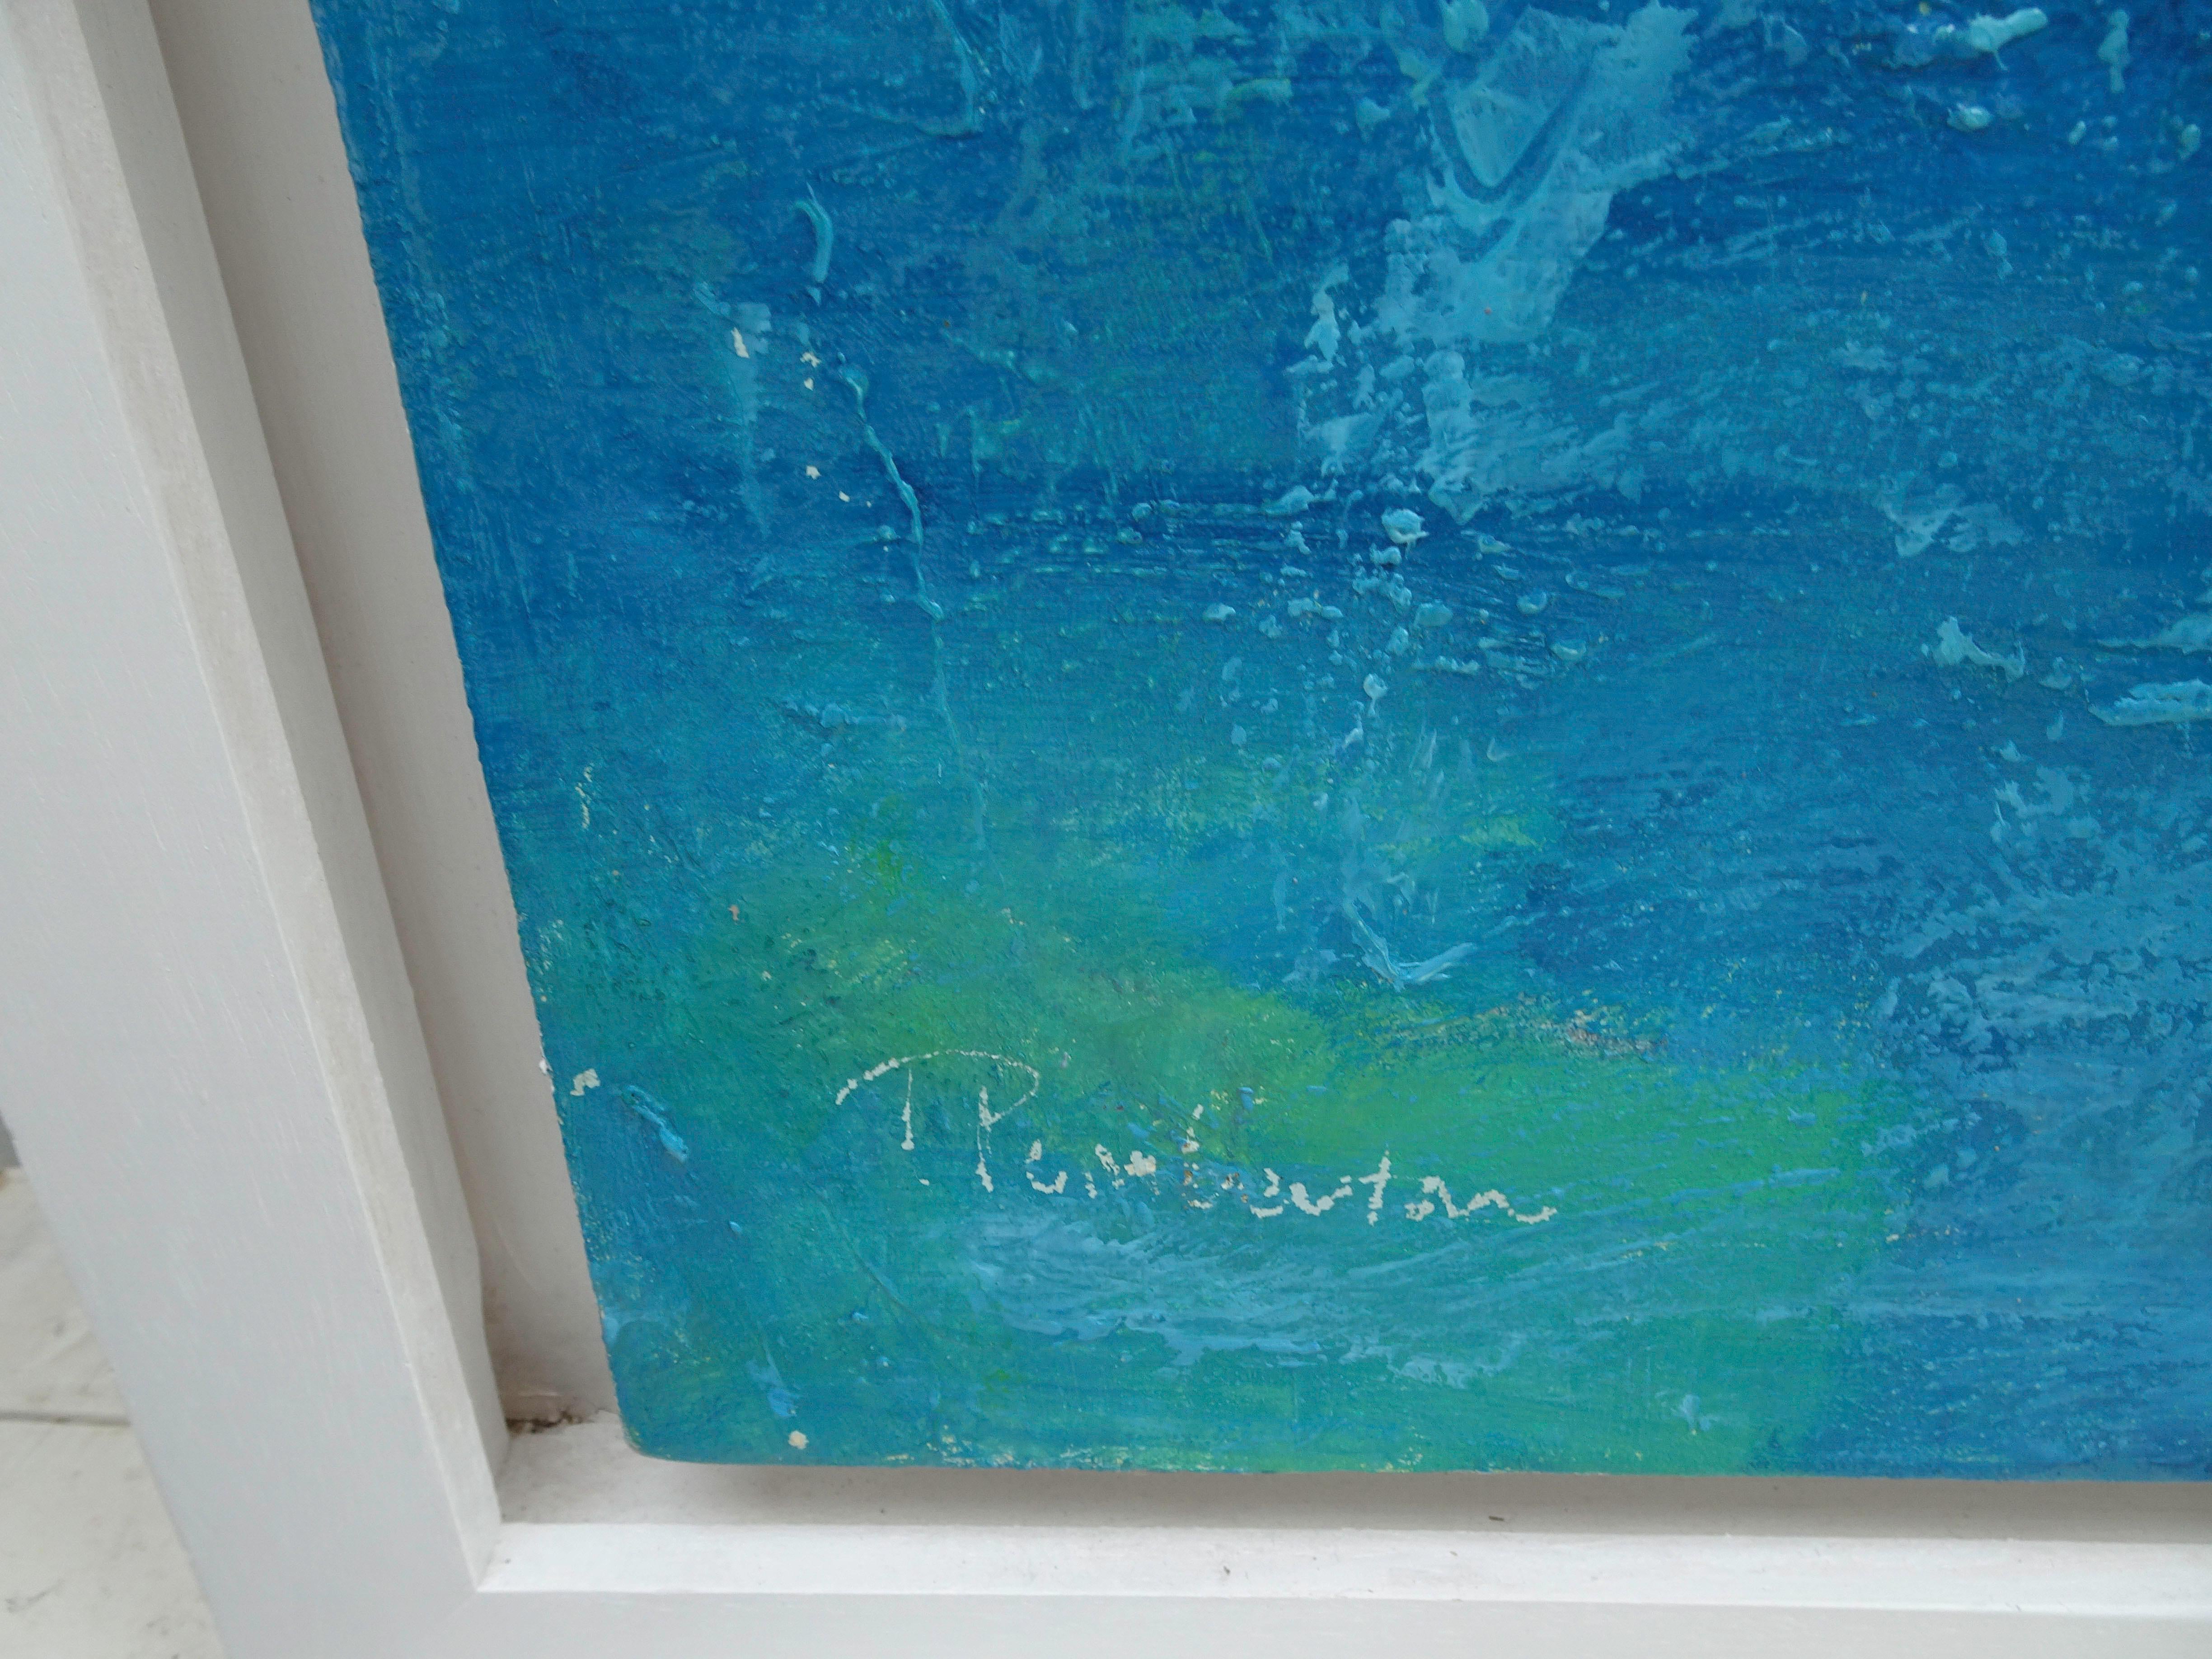 Watching the Tide large contemporary abstract painting for sale, blue sea   - Painting by Teresa Pemberton